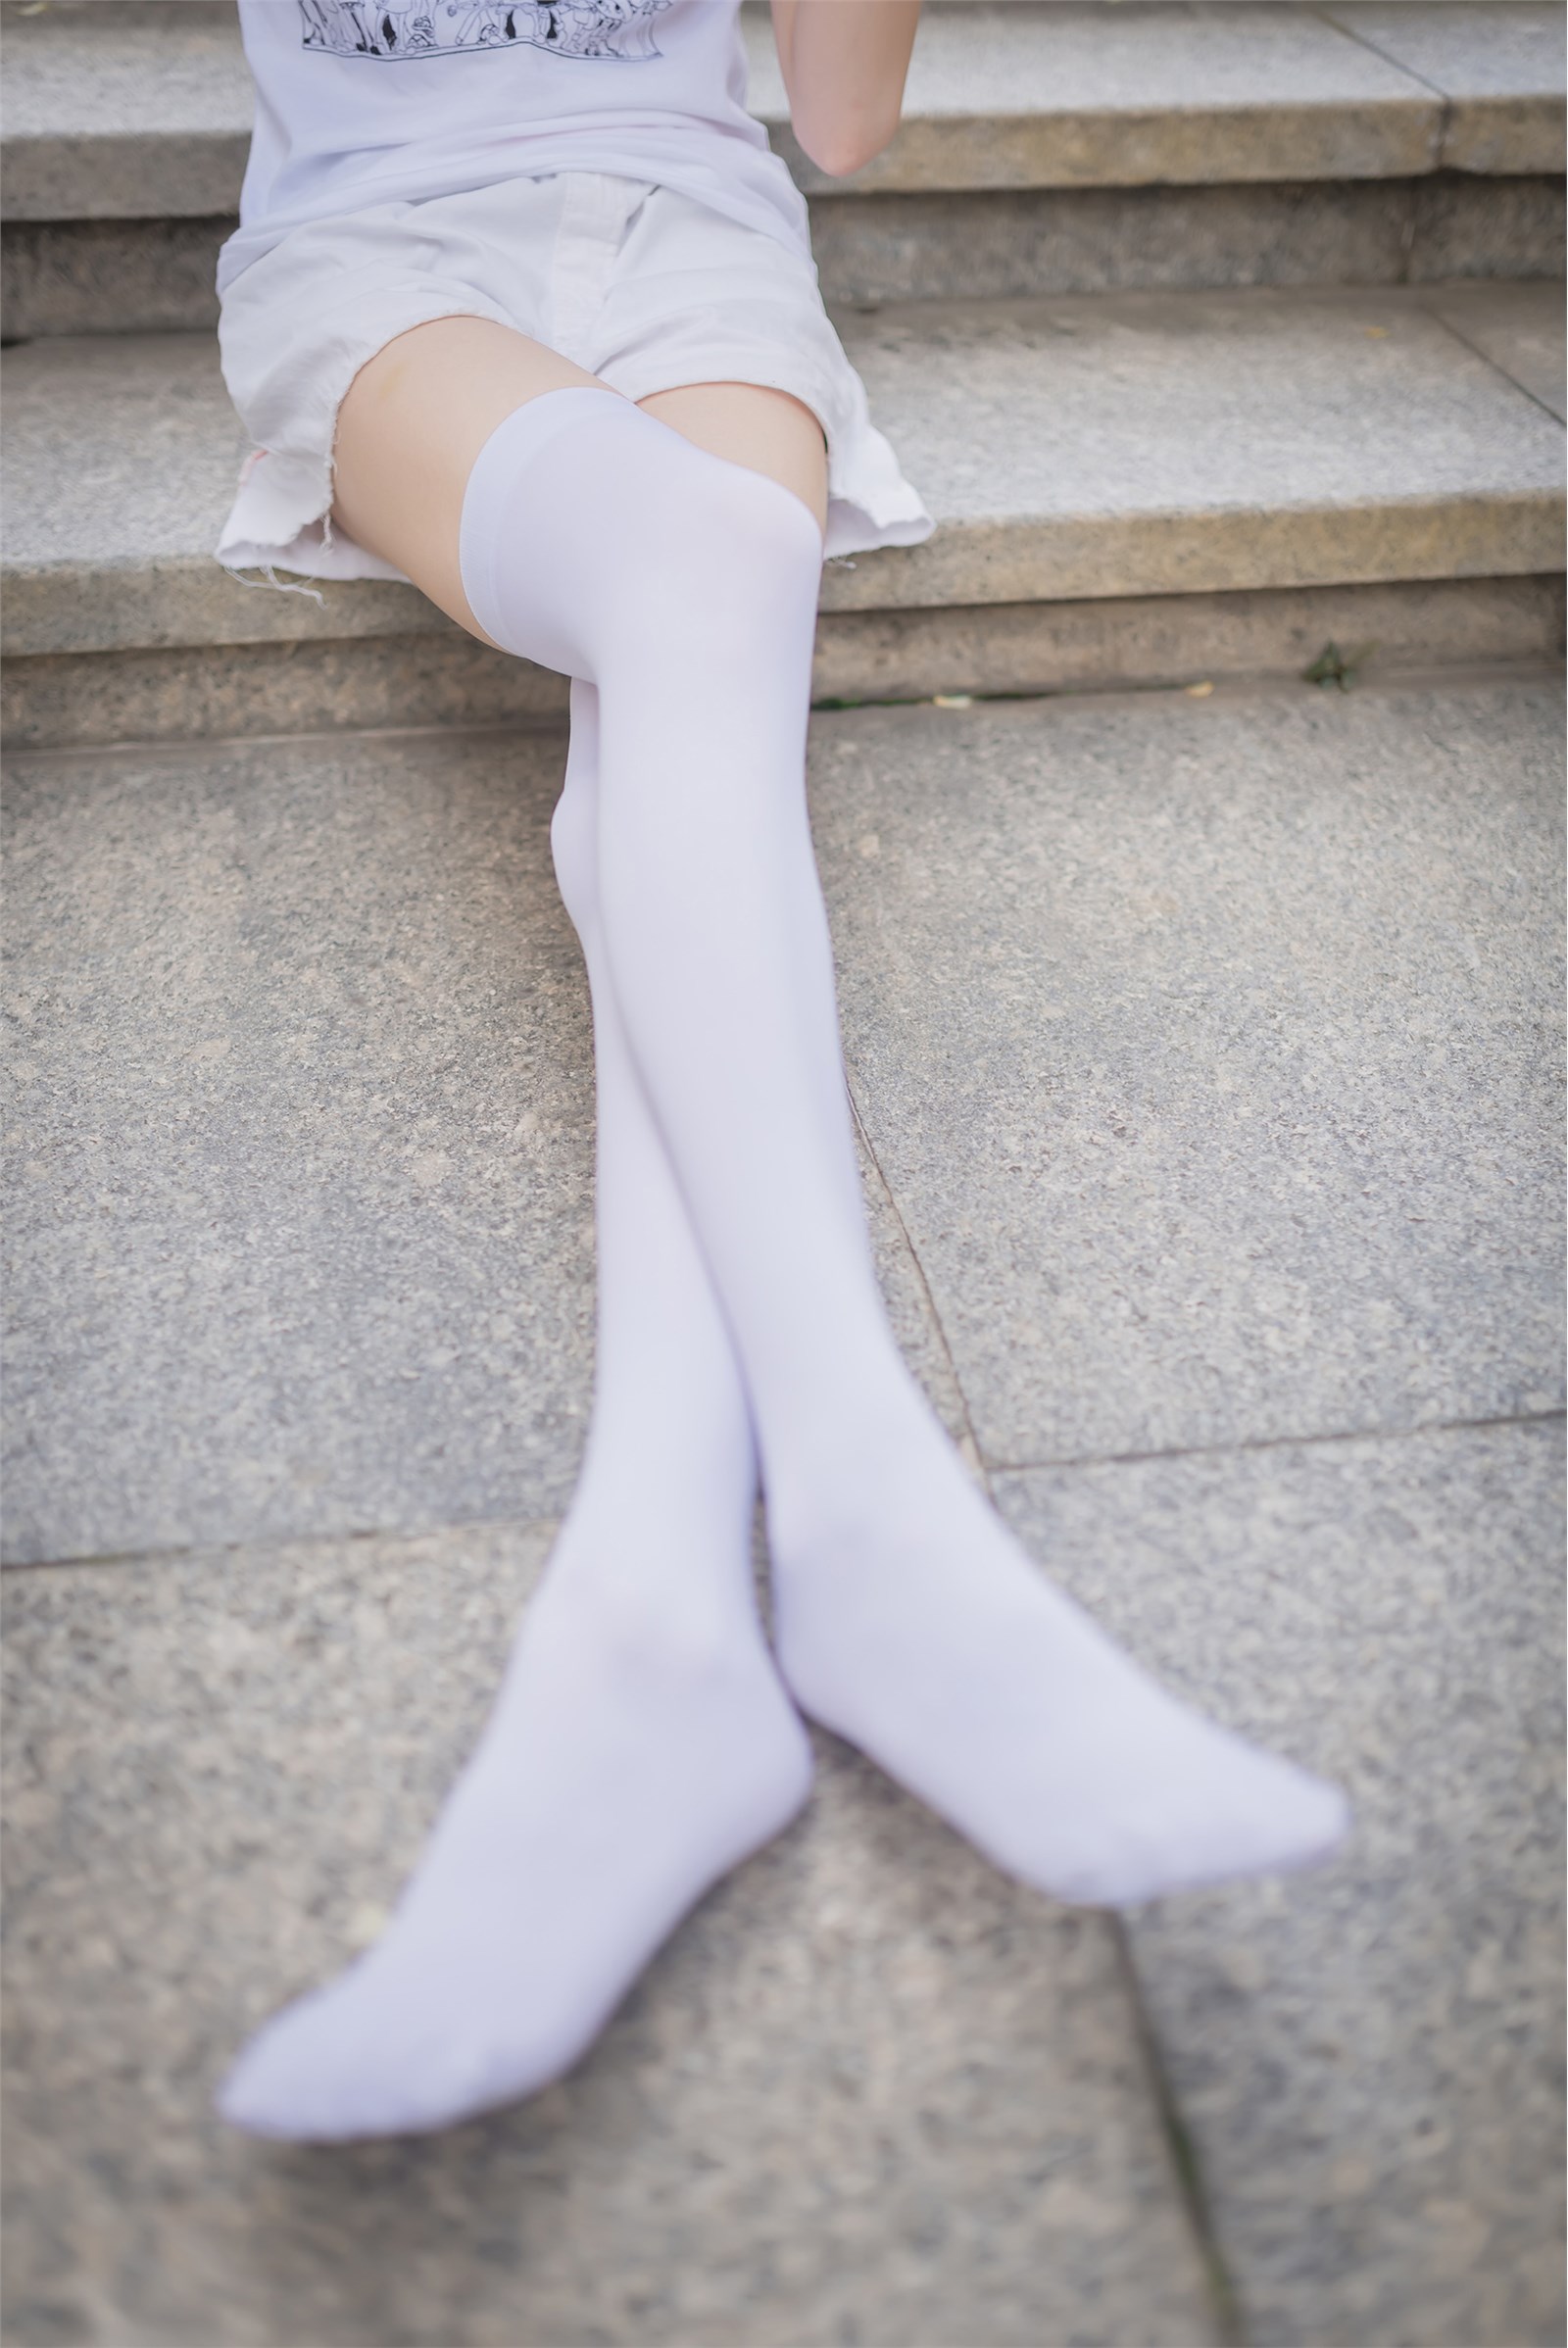 Rabbit plays with painted white stockings over the knee(3)